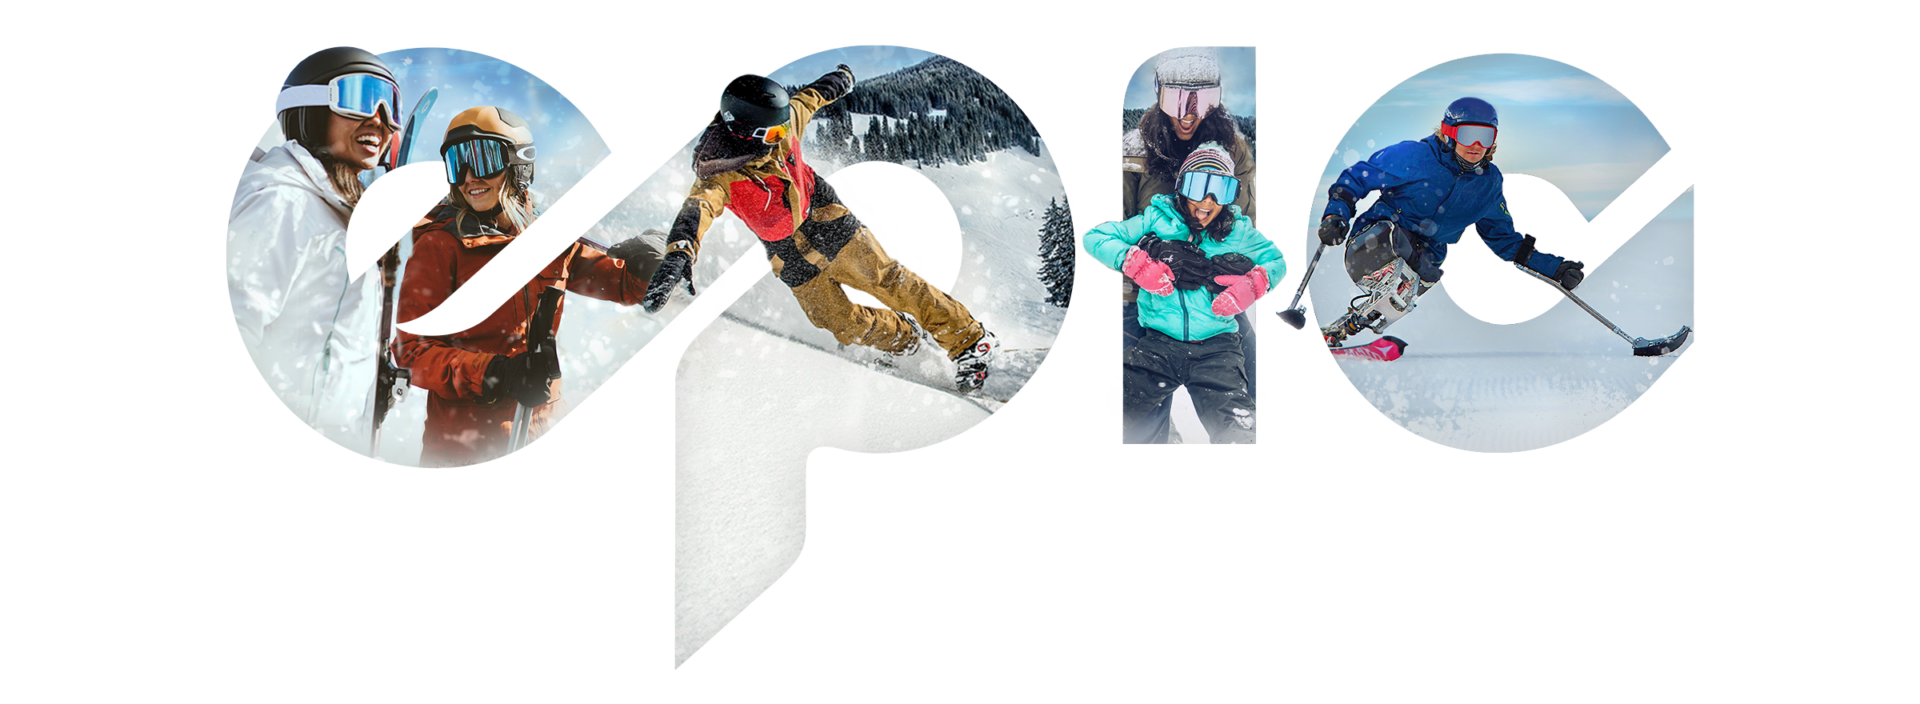 epic logo with skiing images cut into it